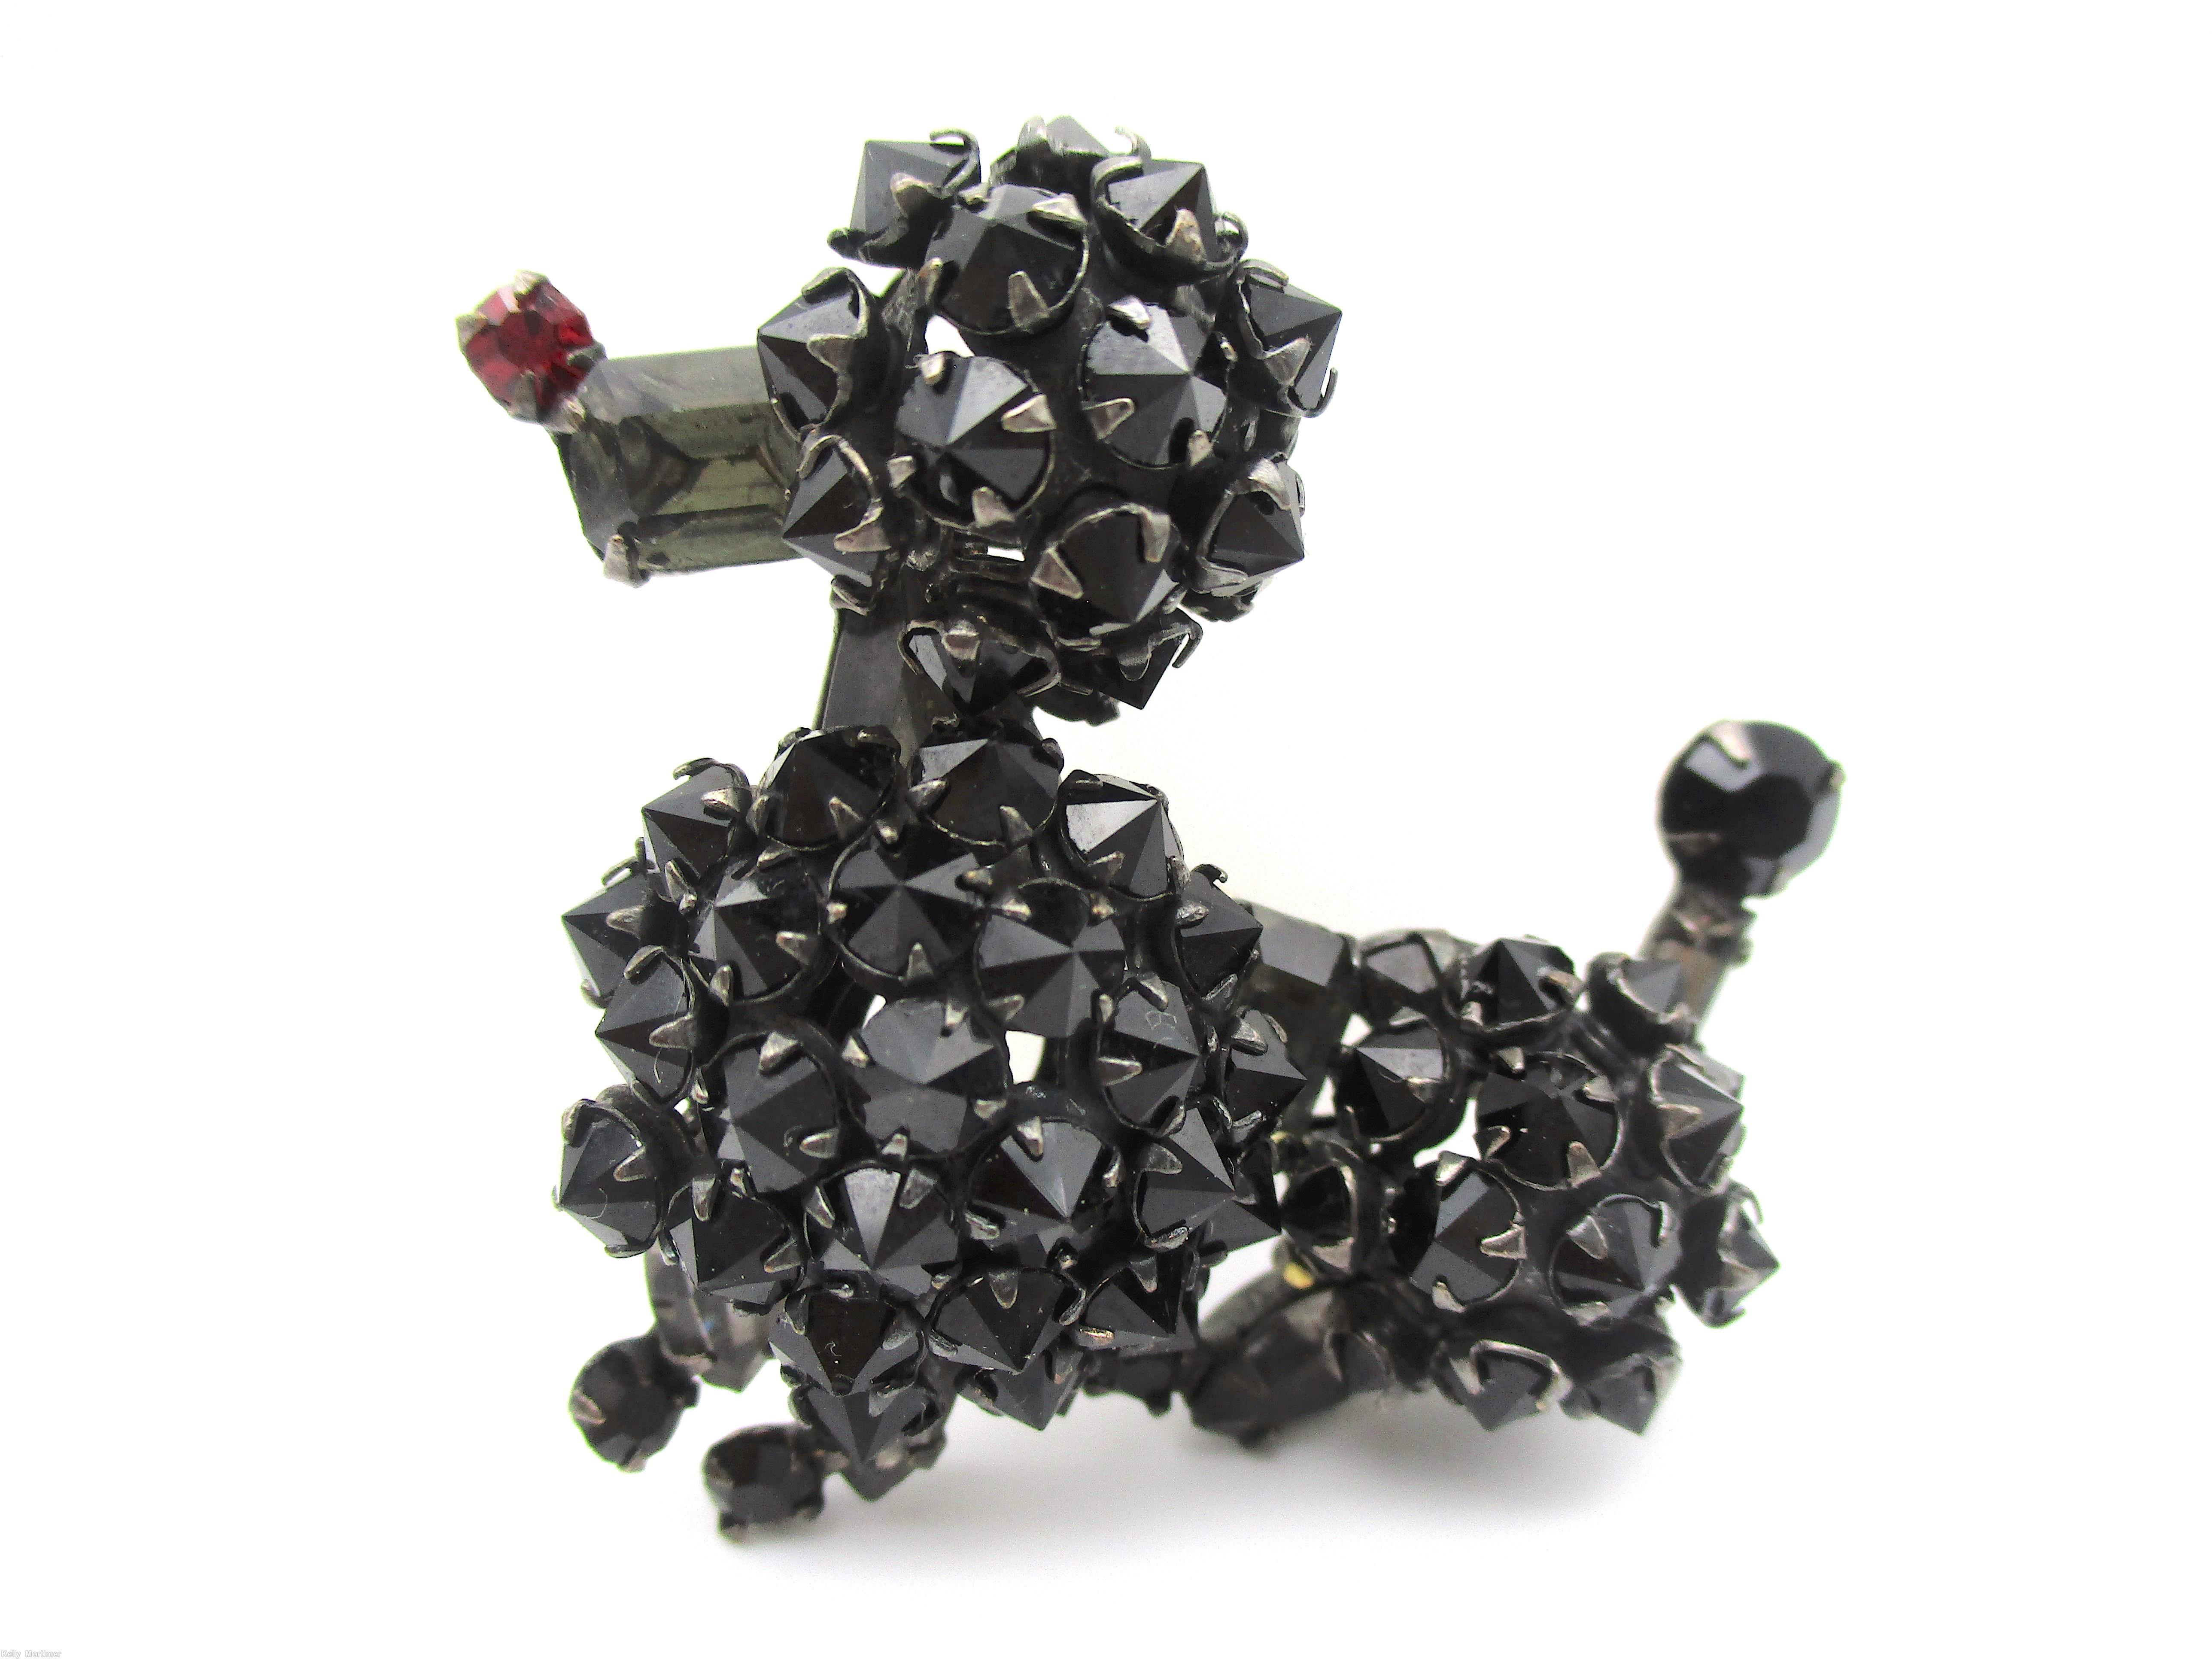 Schreiner sitting poodle pin jet inverted stone large smoky emerald cut ruby small chaton silvertone jewelry